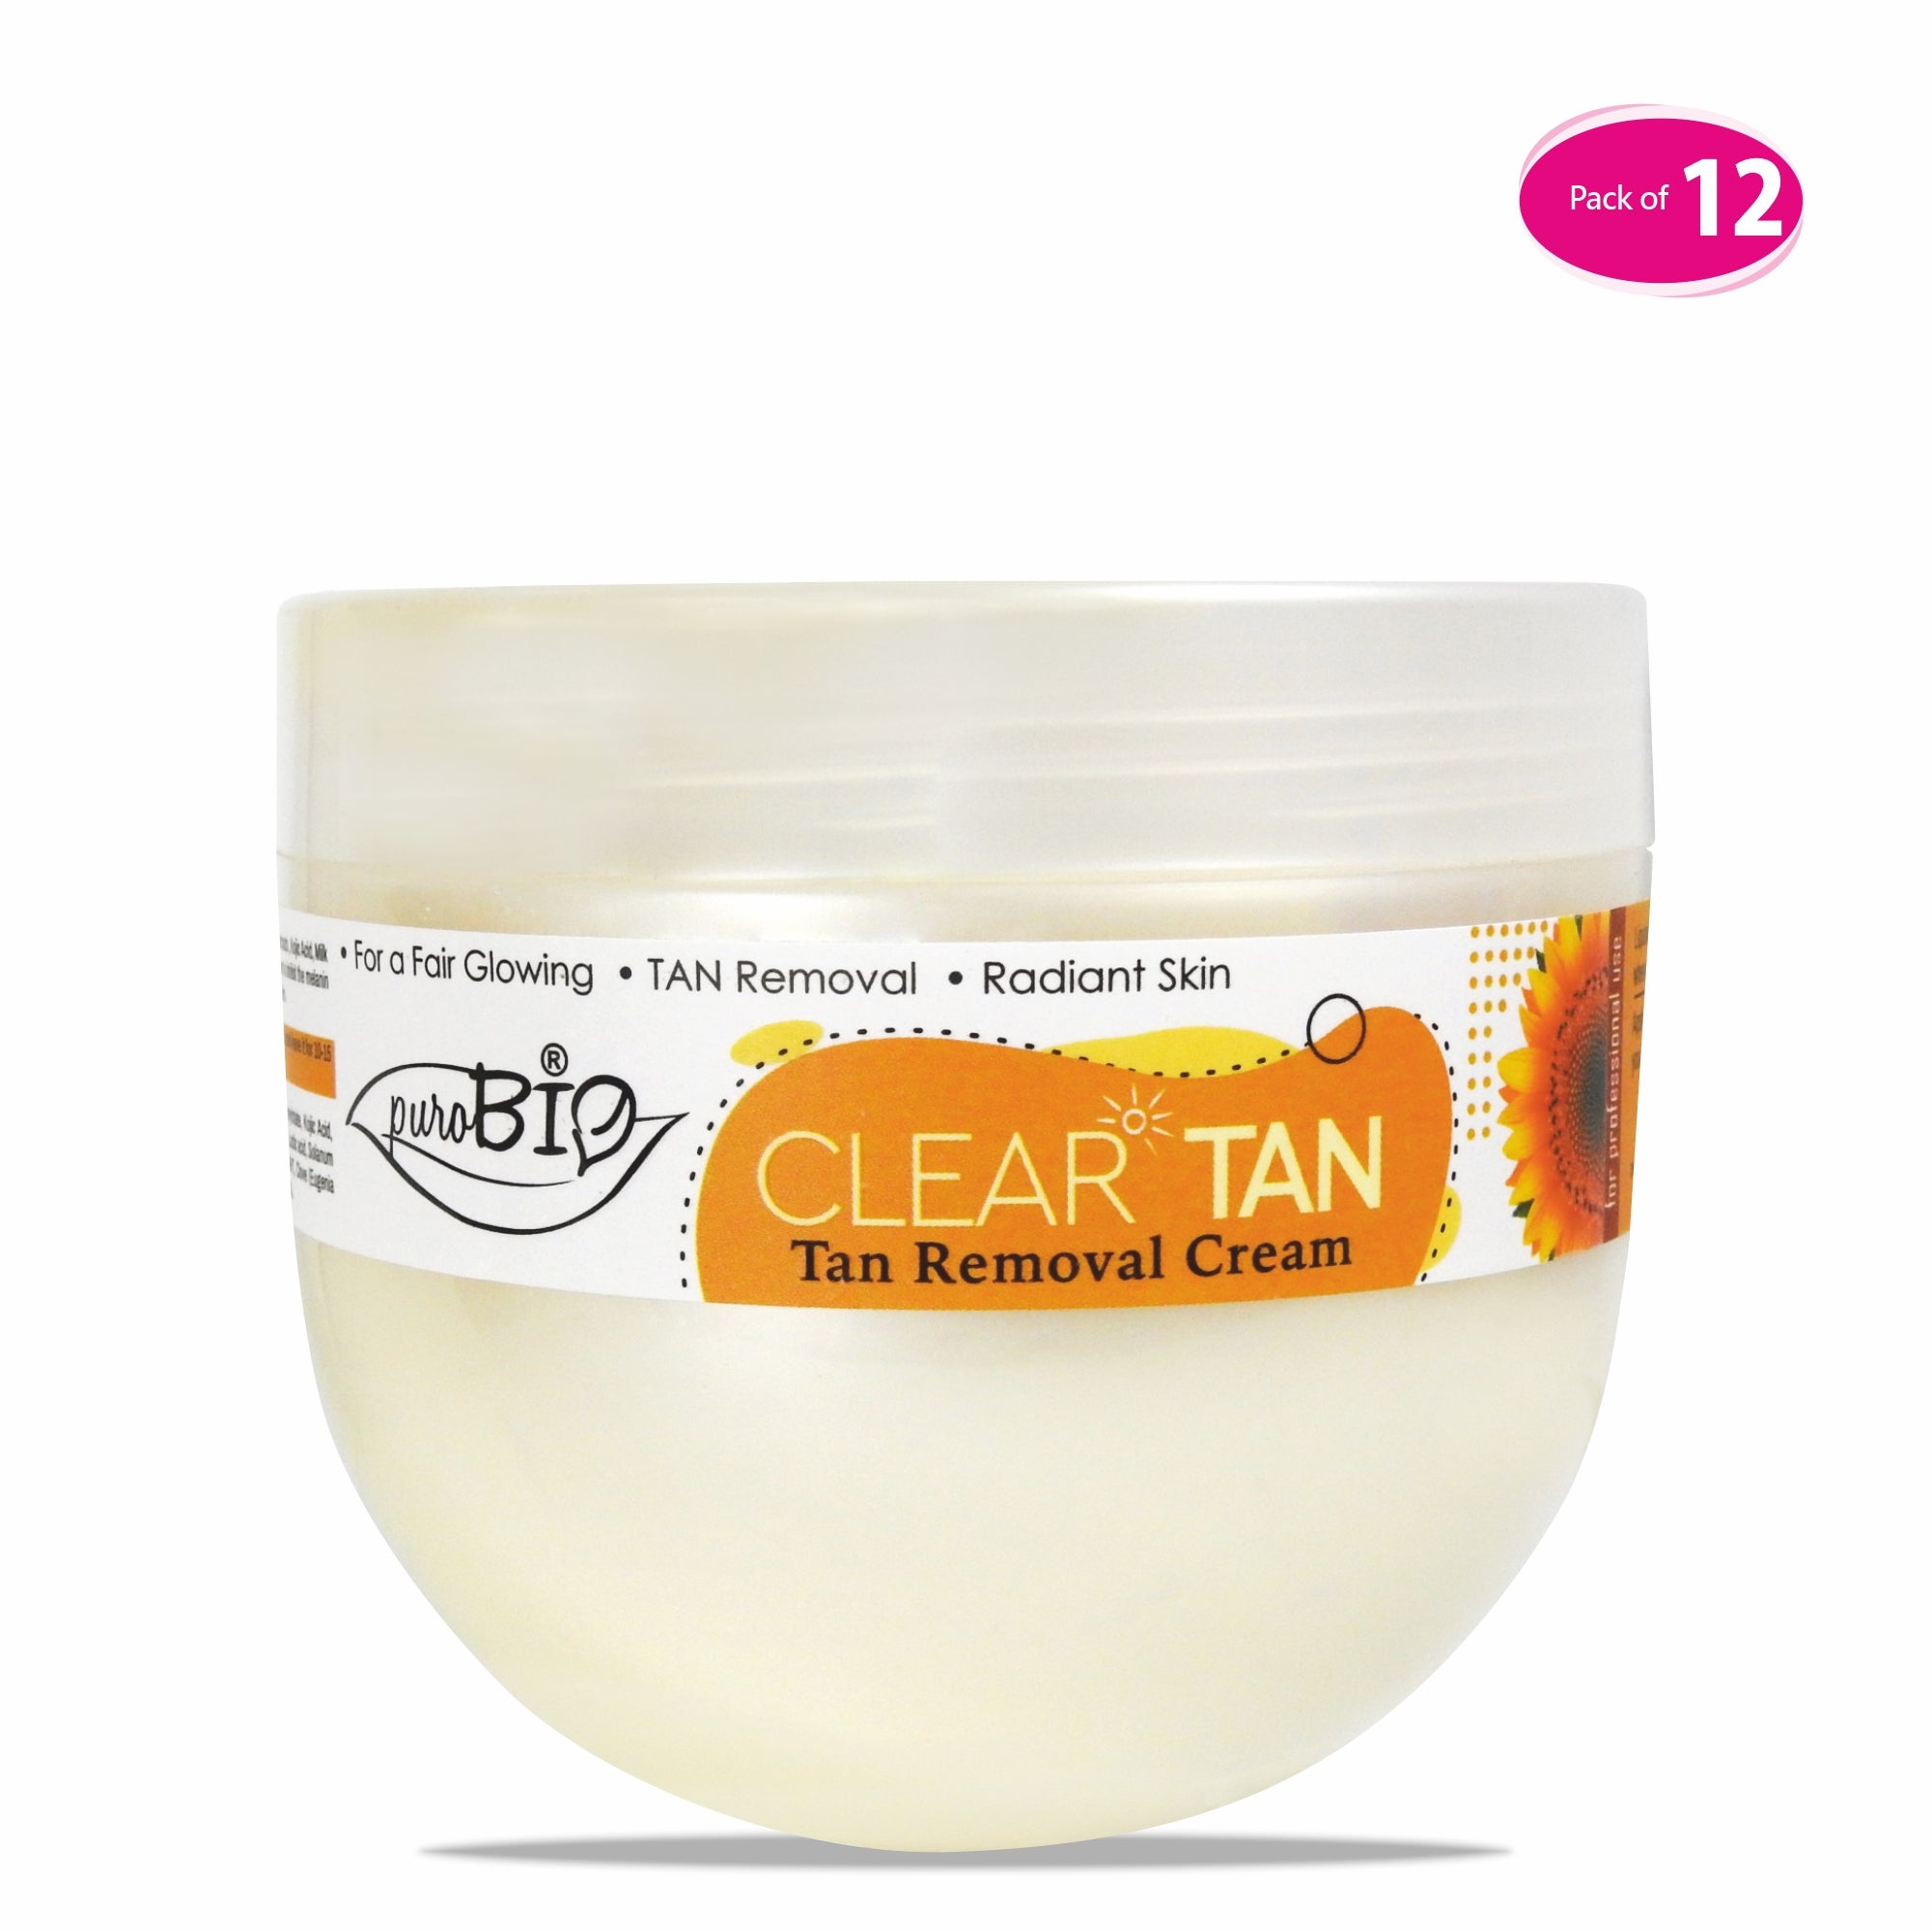 ClearTan Face Pack Best Tan removal Cream in bulk 12 quantity